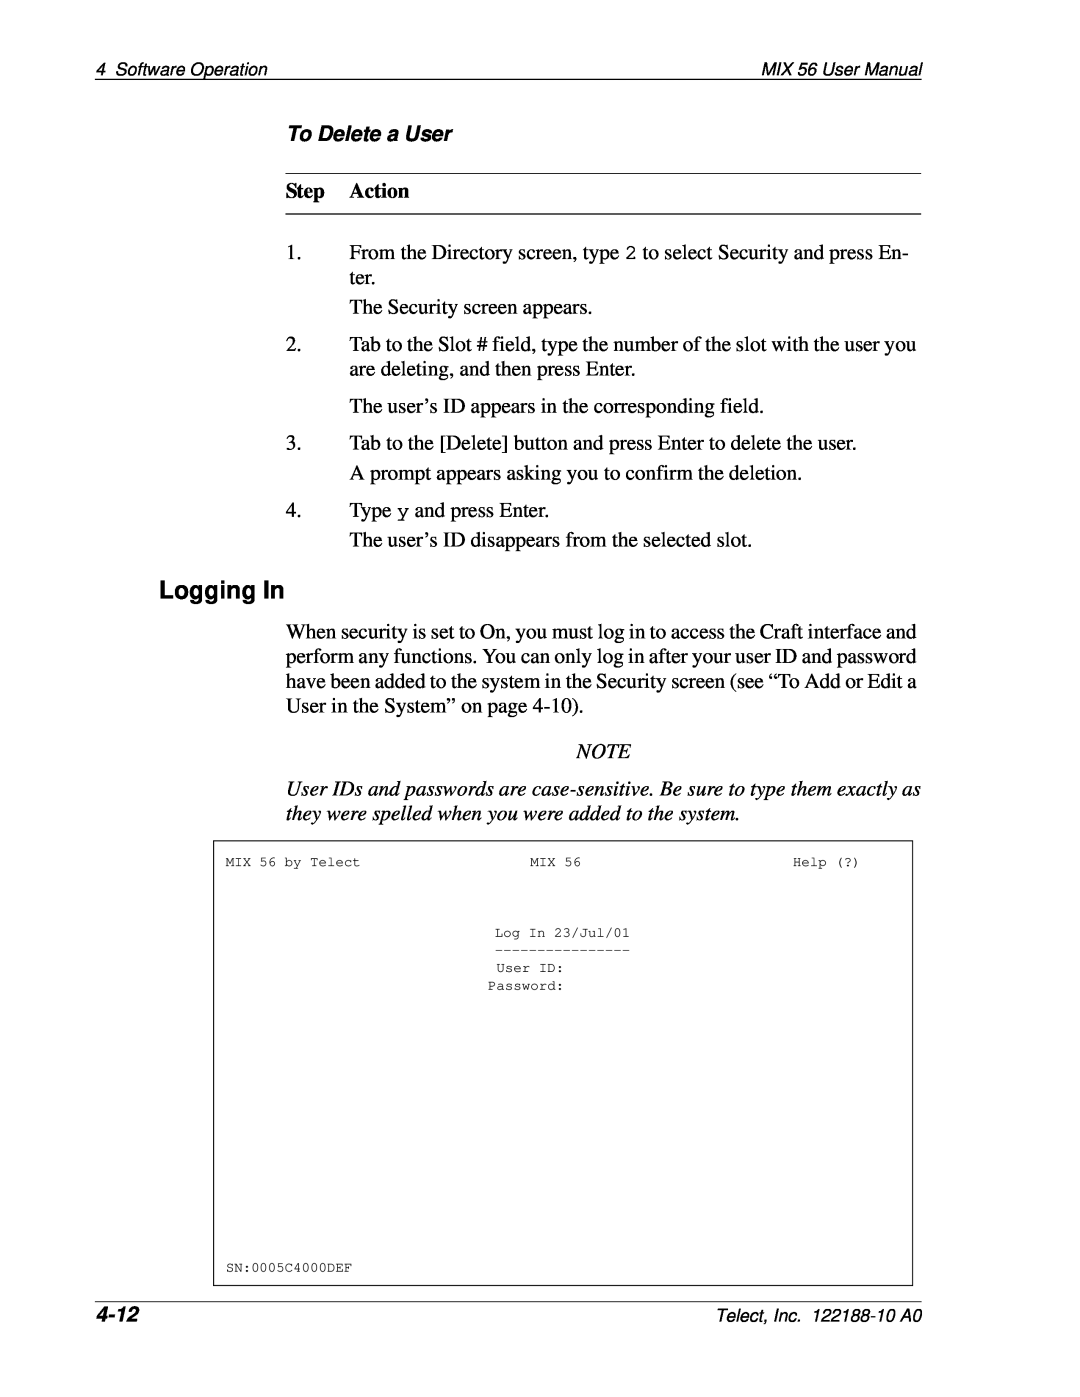 Telect MIX 56 user manual Logging In, To Delete a User, 4-12, Step Action 